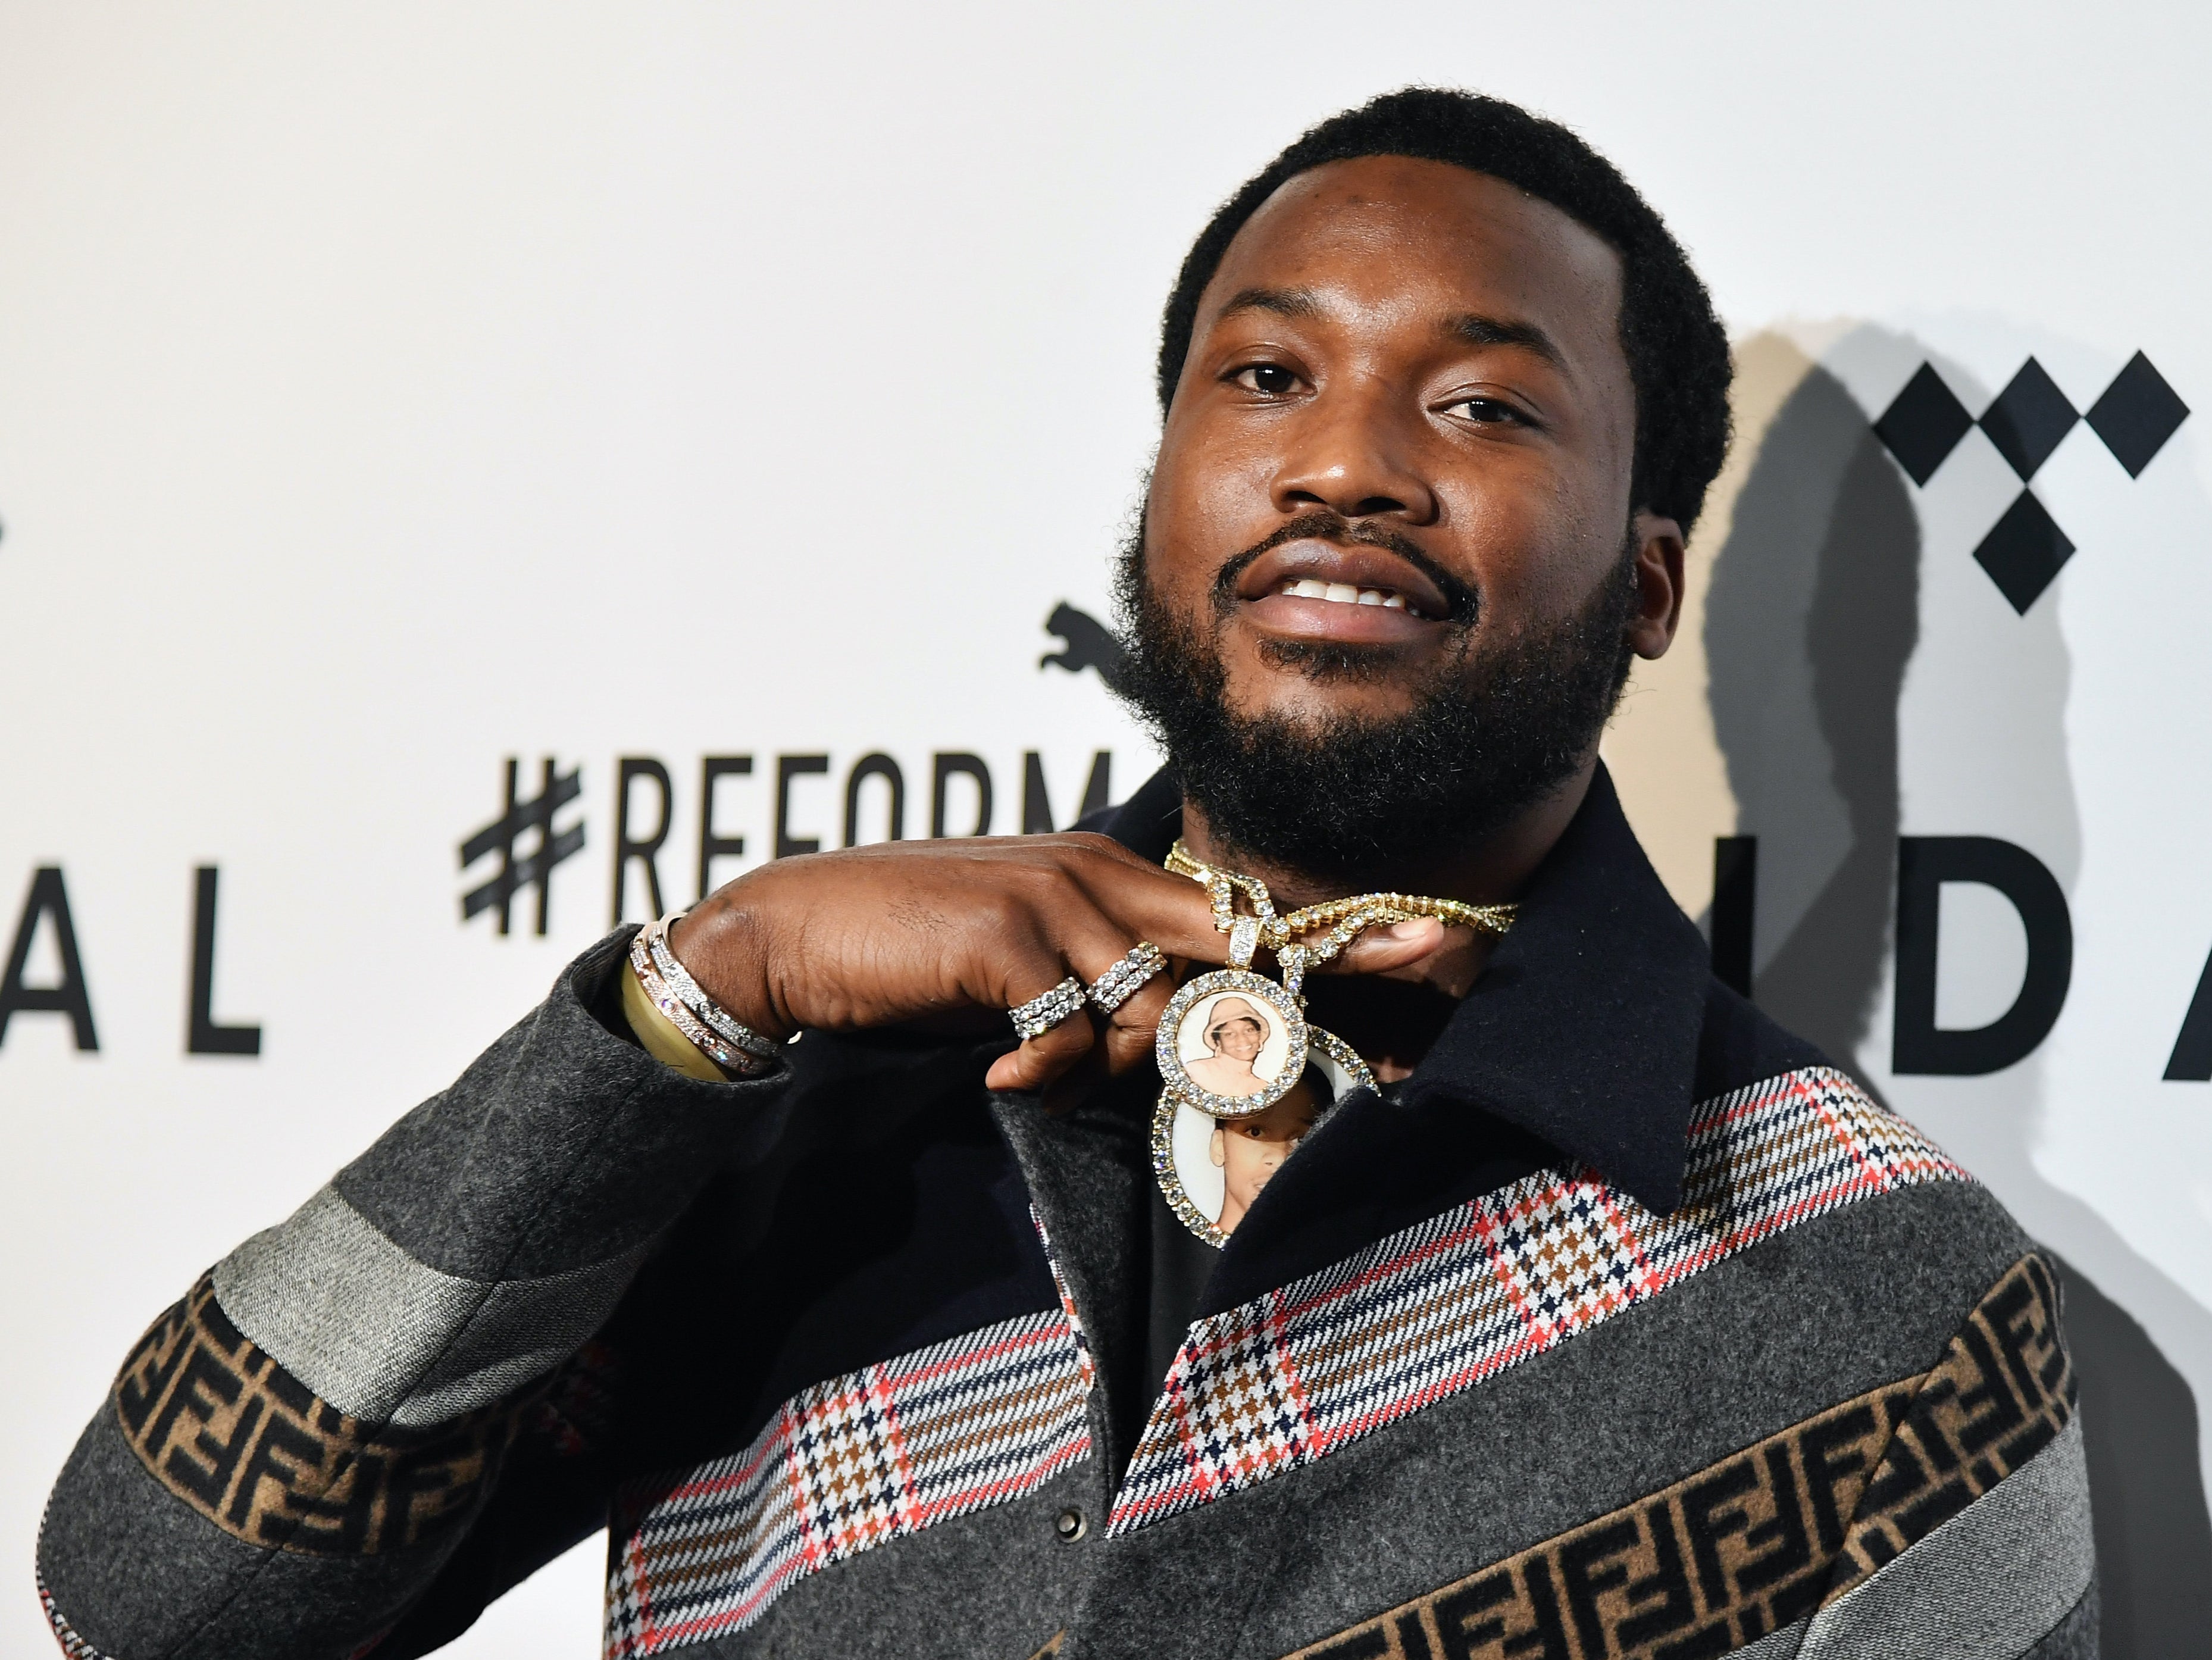 Meek Mill has been criticised over song lyrics about the late Kobe Bryant